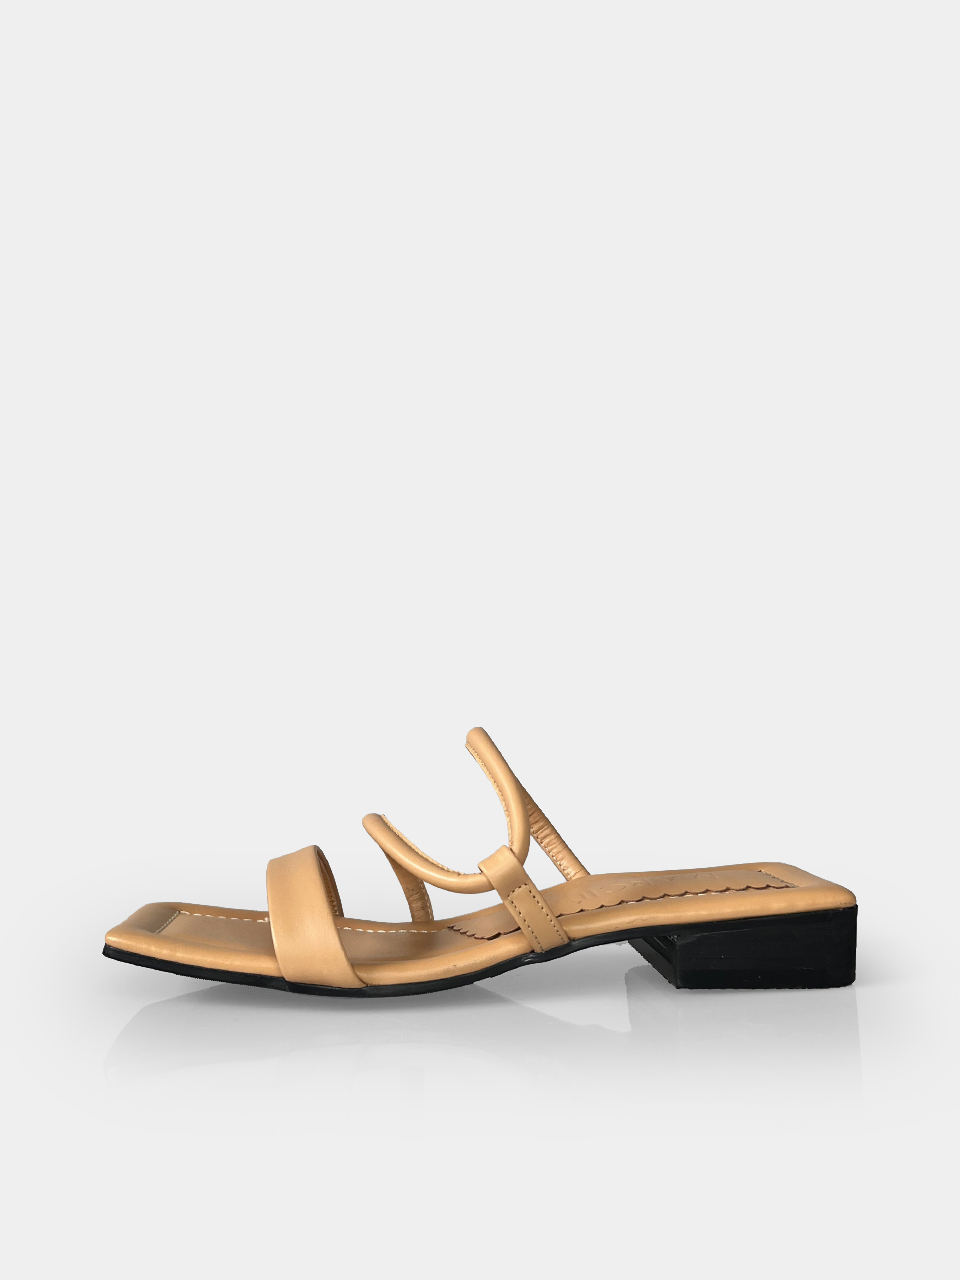 [Out of stock] Mrc067 Curve Flat Sandal (Nude Beige)